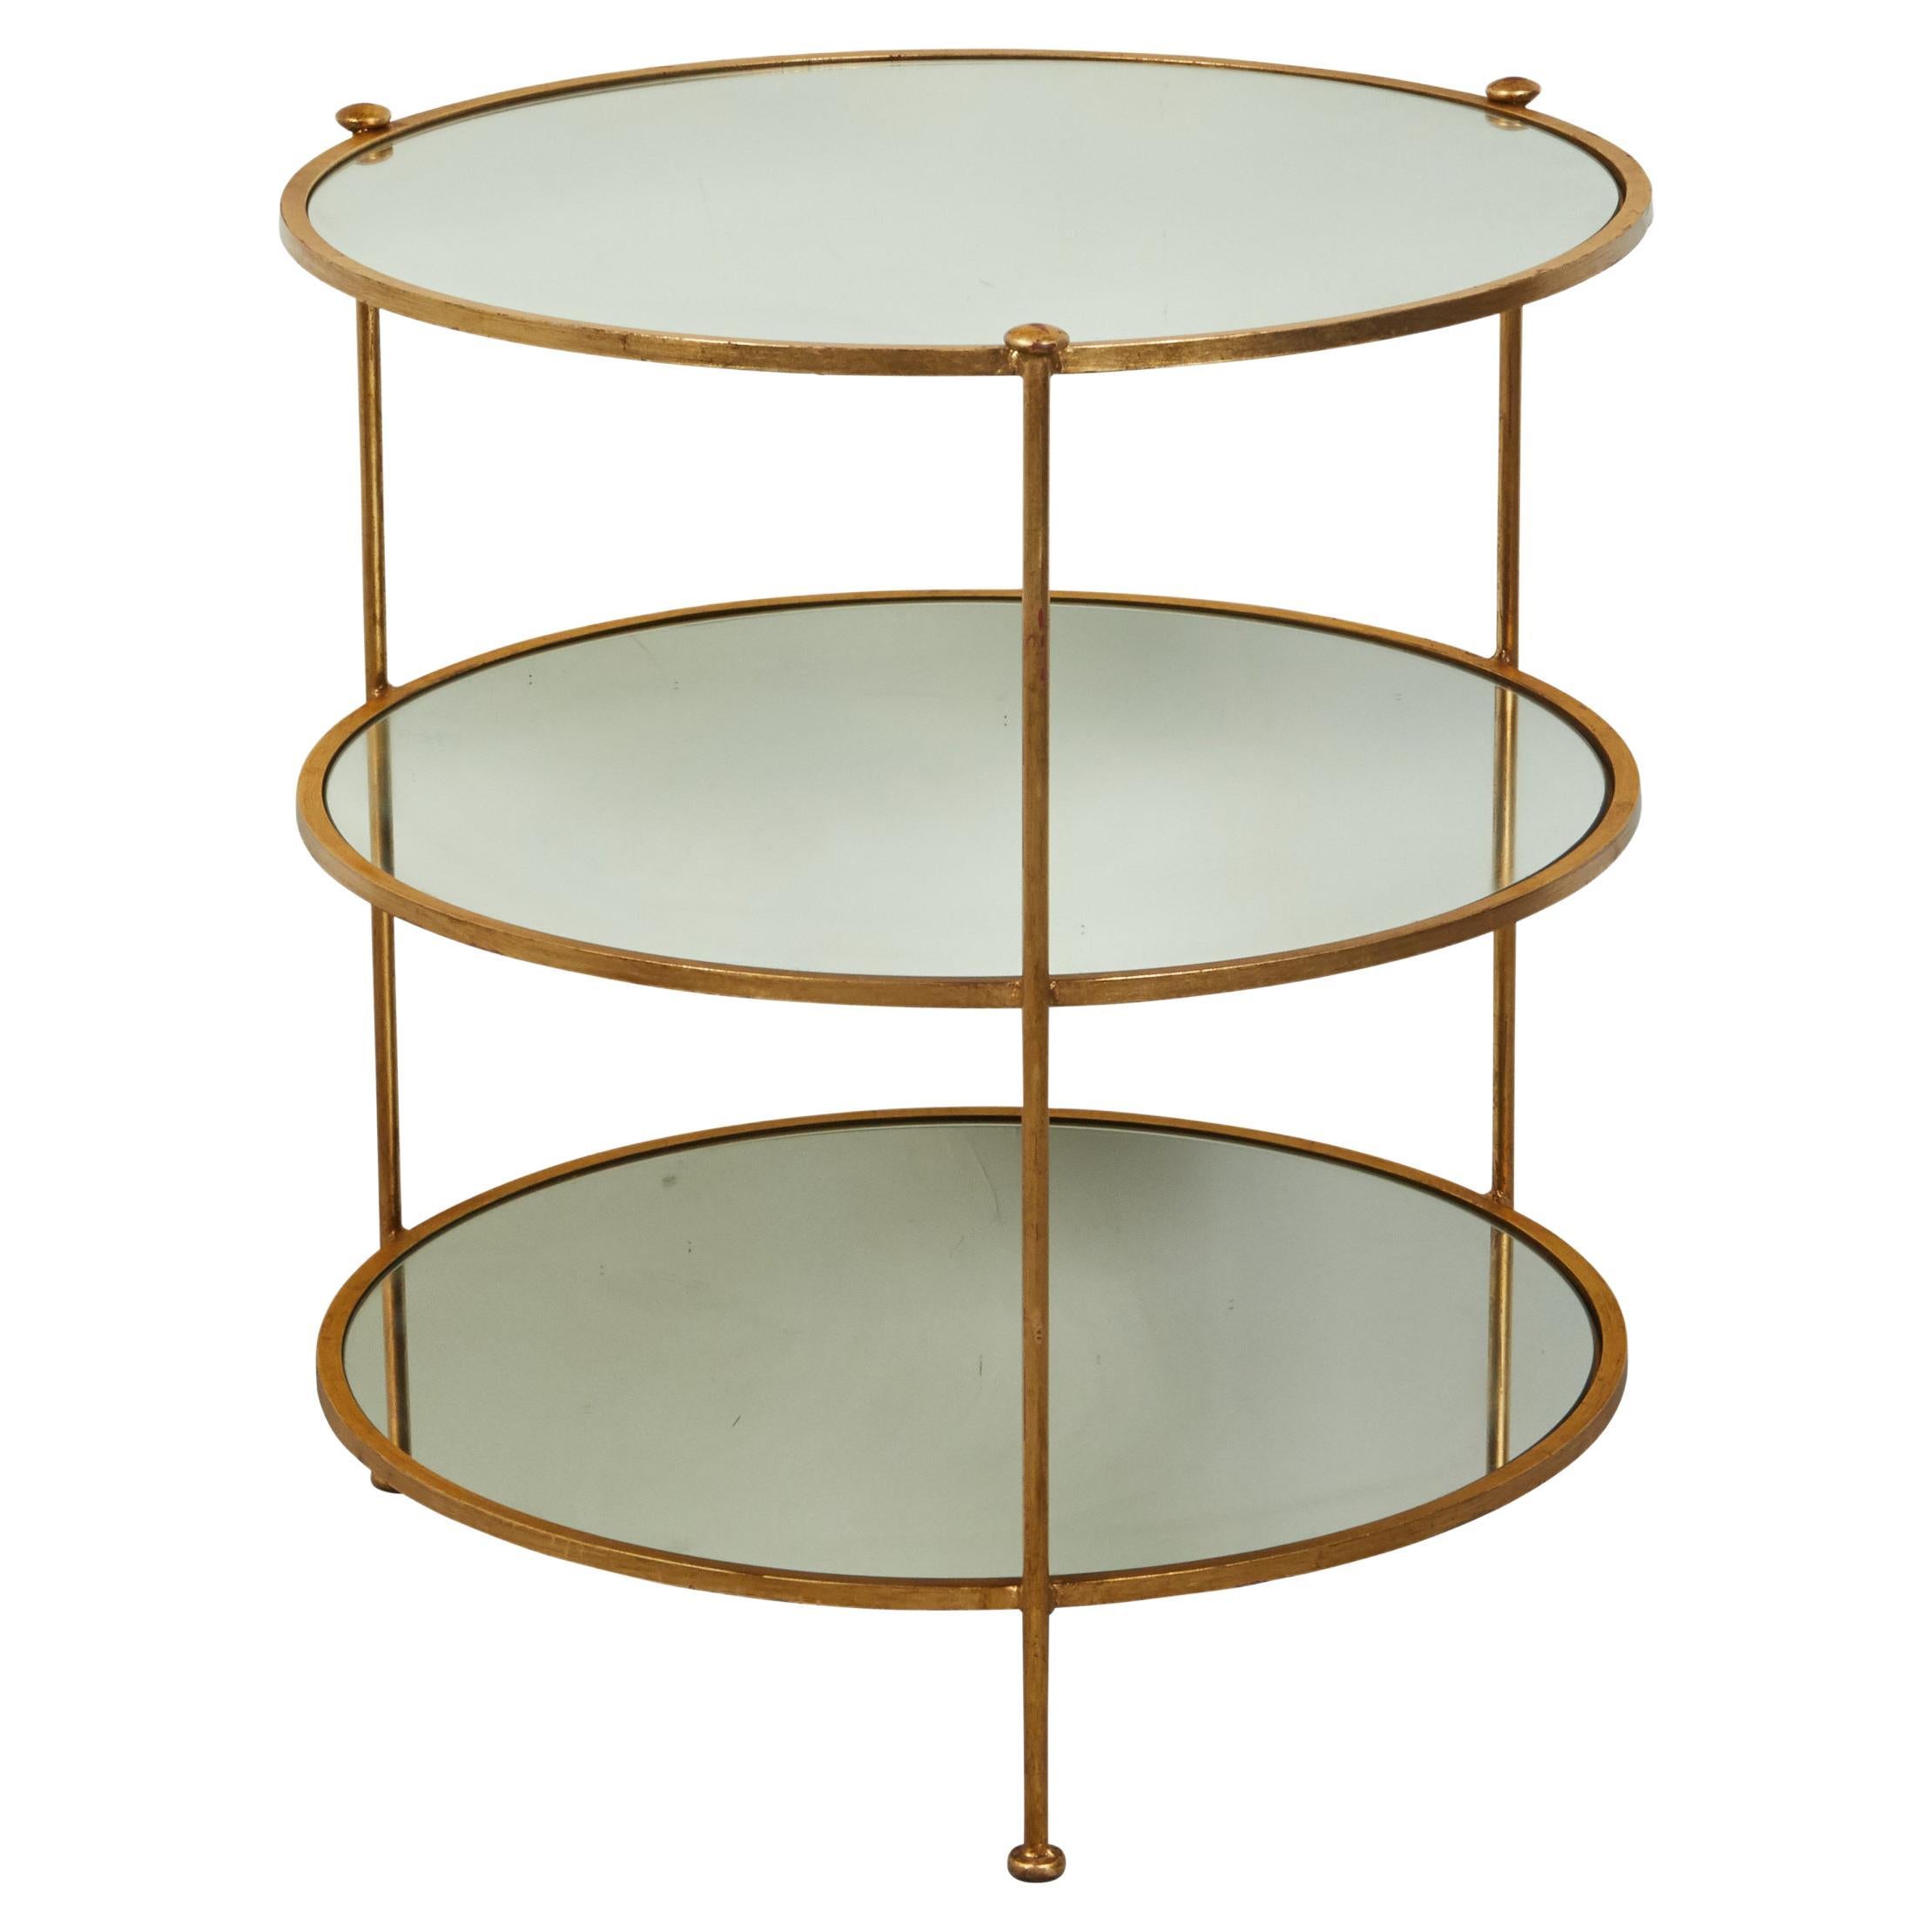 Italian Midcentury Gilt Iron Three-Tier Side Table with Round Mirrored Shelves For Sale